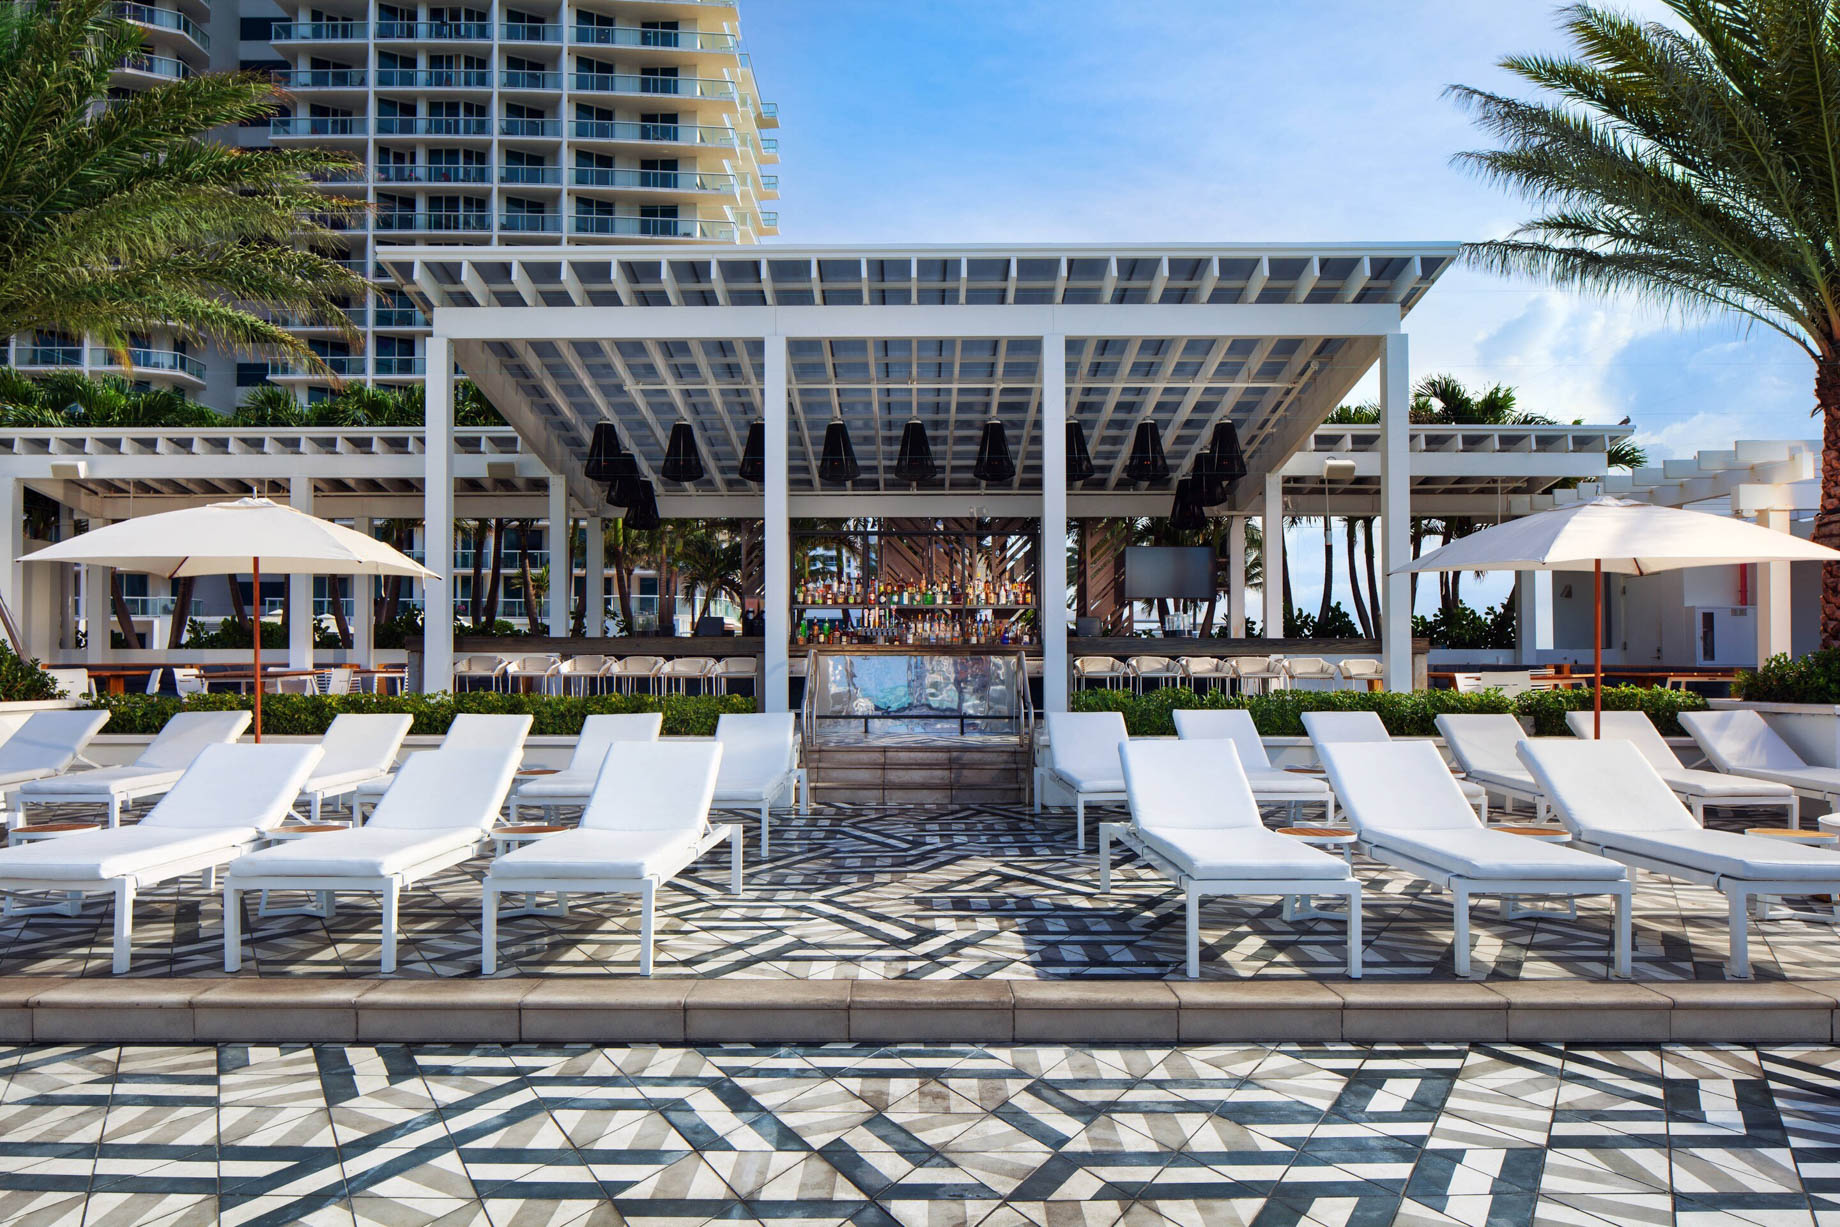 W Fort Lauderdale Hotel - Fort Lauderdale, FL, USA - WET Bar & Grill